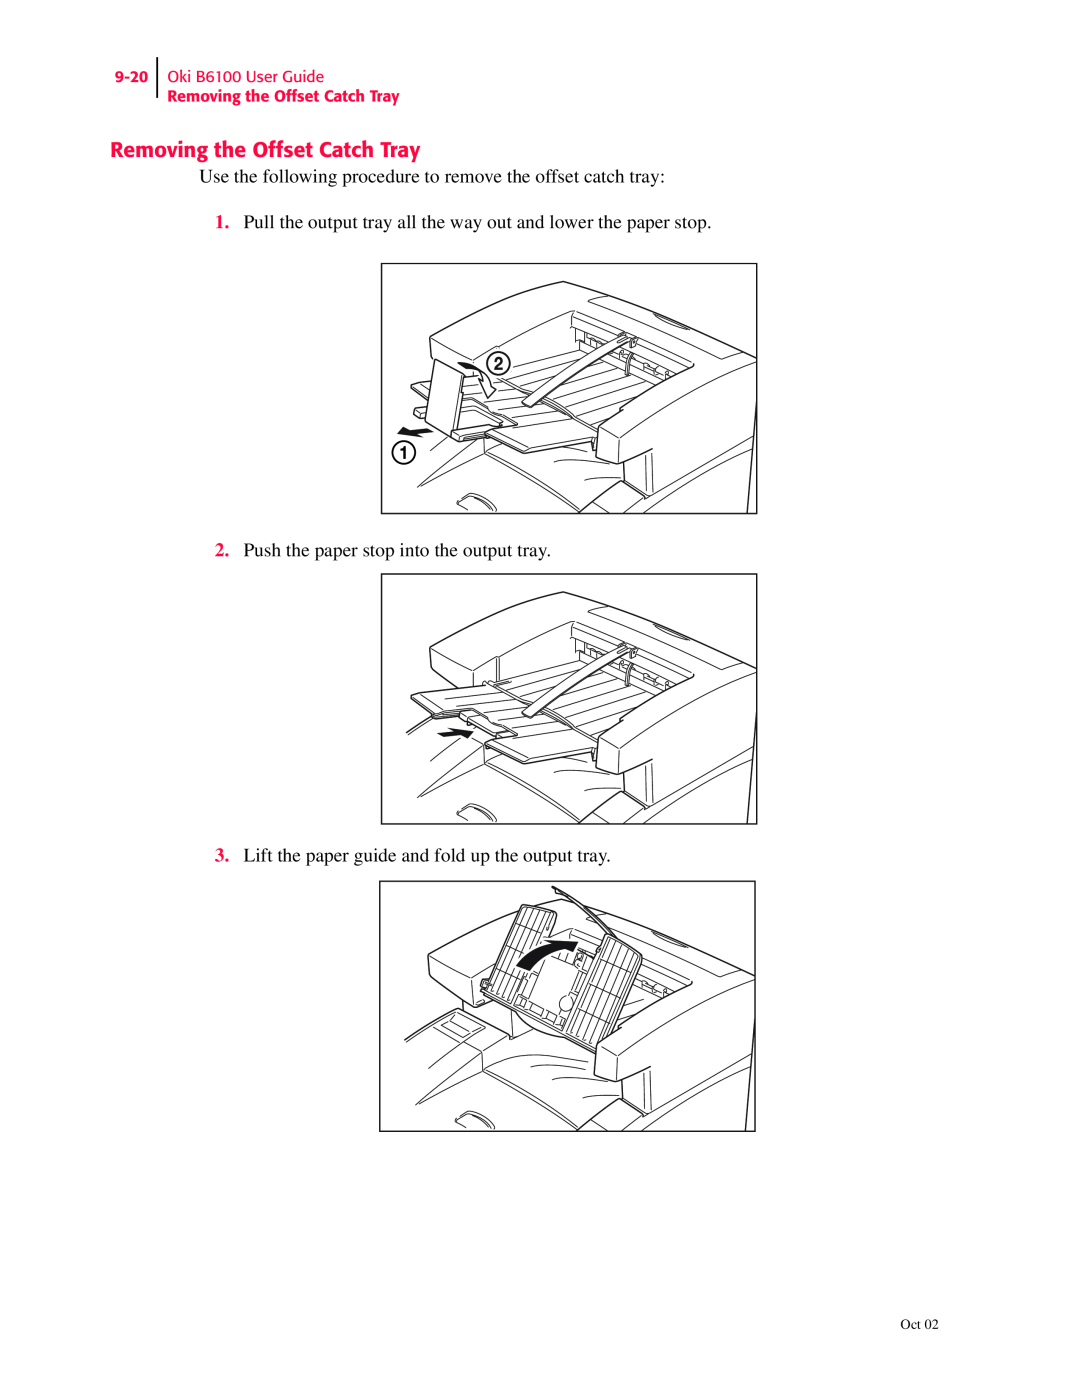 Oki 6100 manual Removing the Offset Catch Tray, Use the following procedure to remove the offset catch tray 